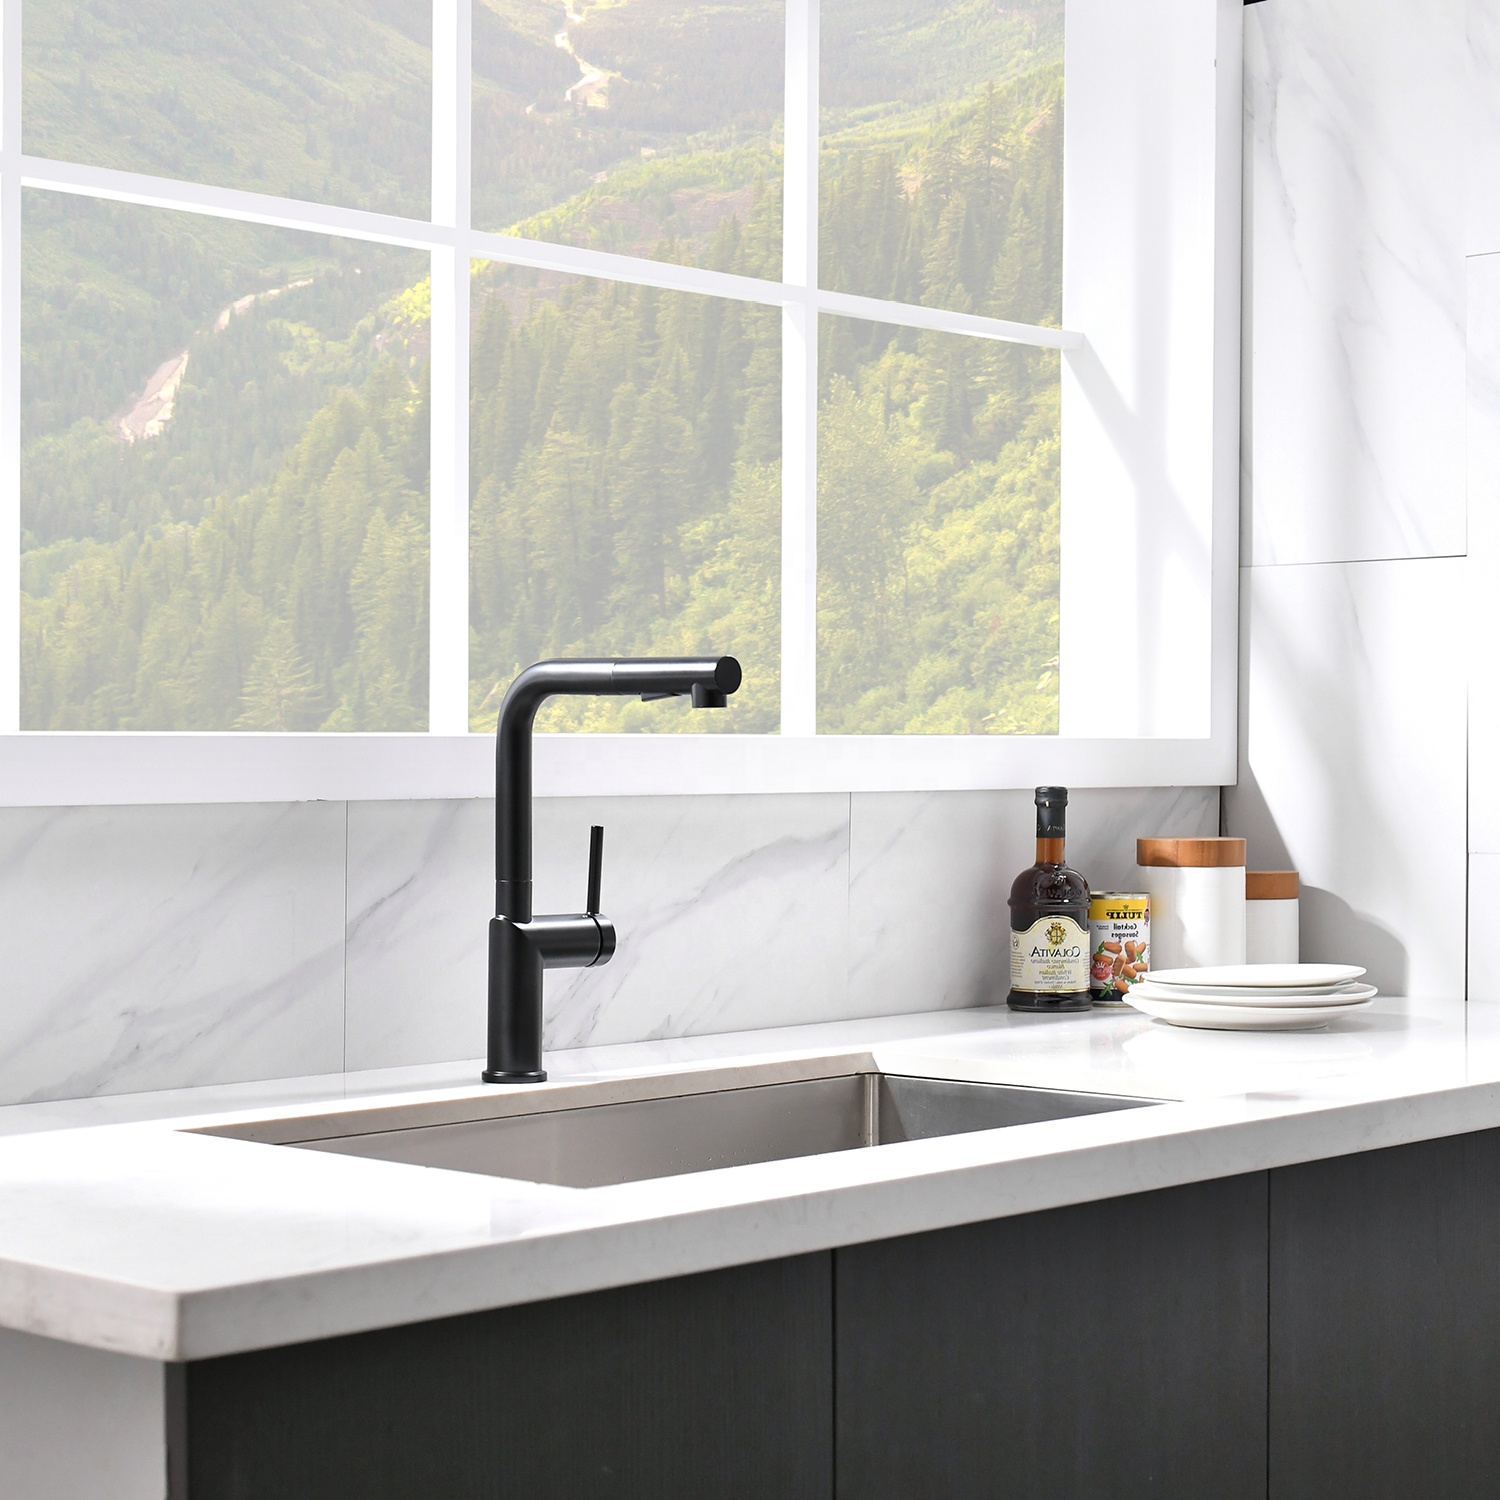 Contemporary Faucet Kitchen Sink Water Taps Faucet New Design Modern Pull Out Spray Kitchen Faucet